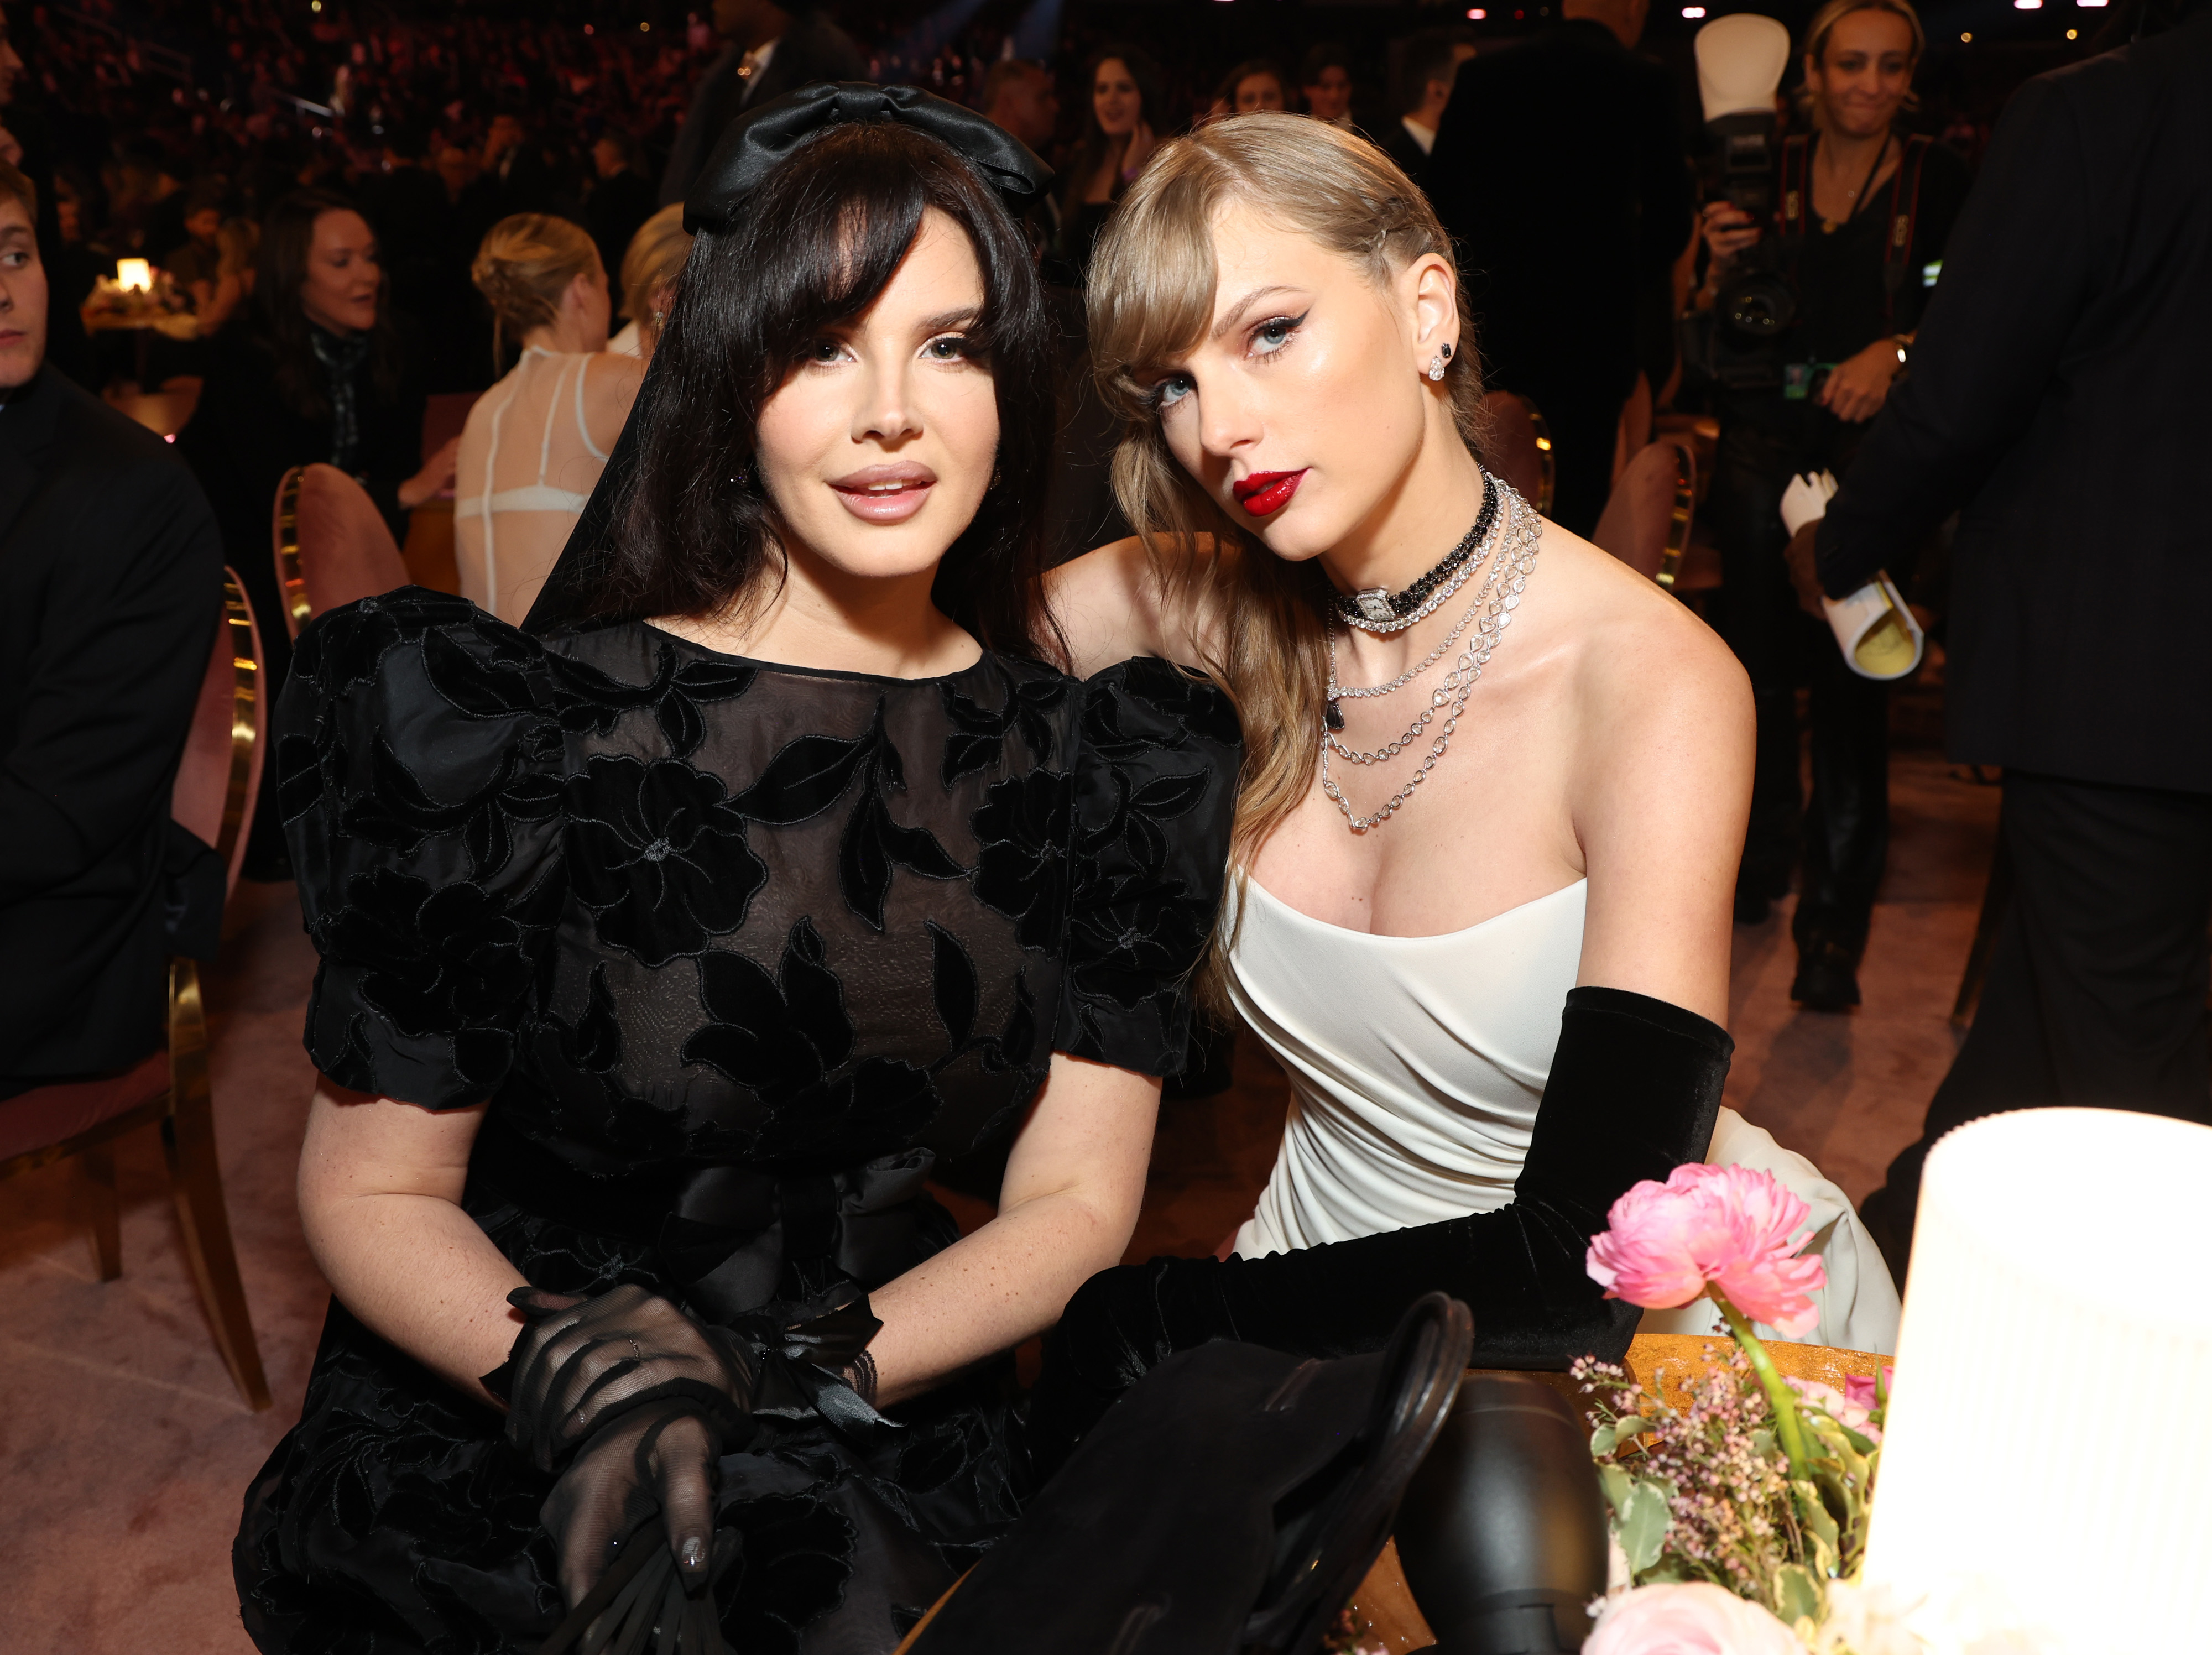 Close-up of Taylor and Lana sitting together